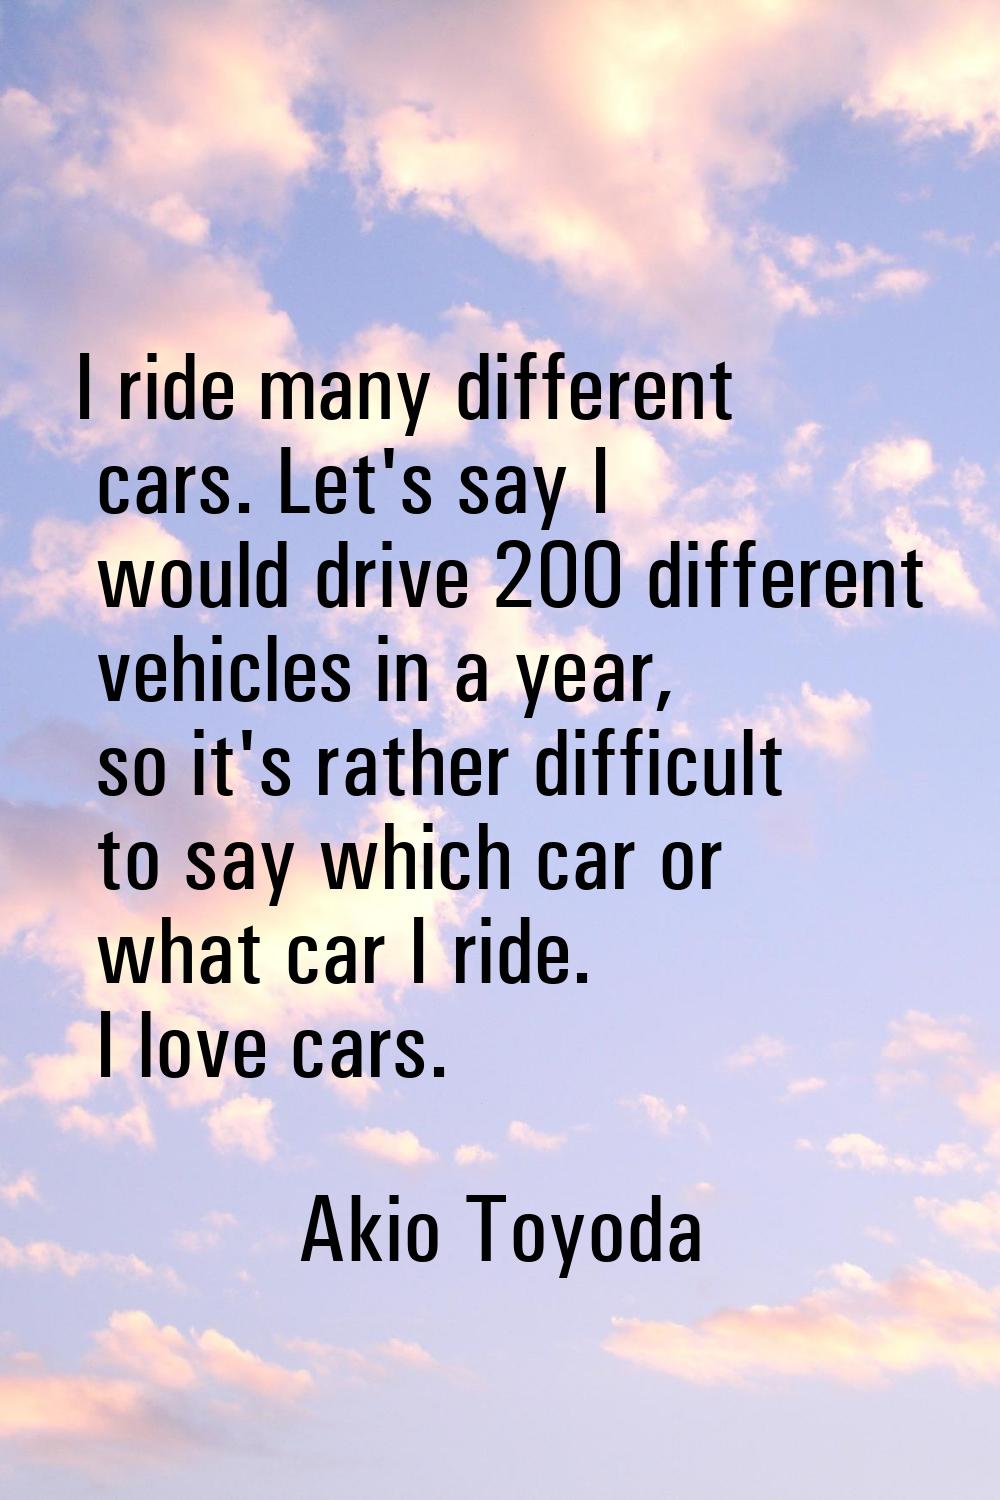 I ride many different cars. Let's say I would drive 200 different vehicles in a year, so it's rathe